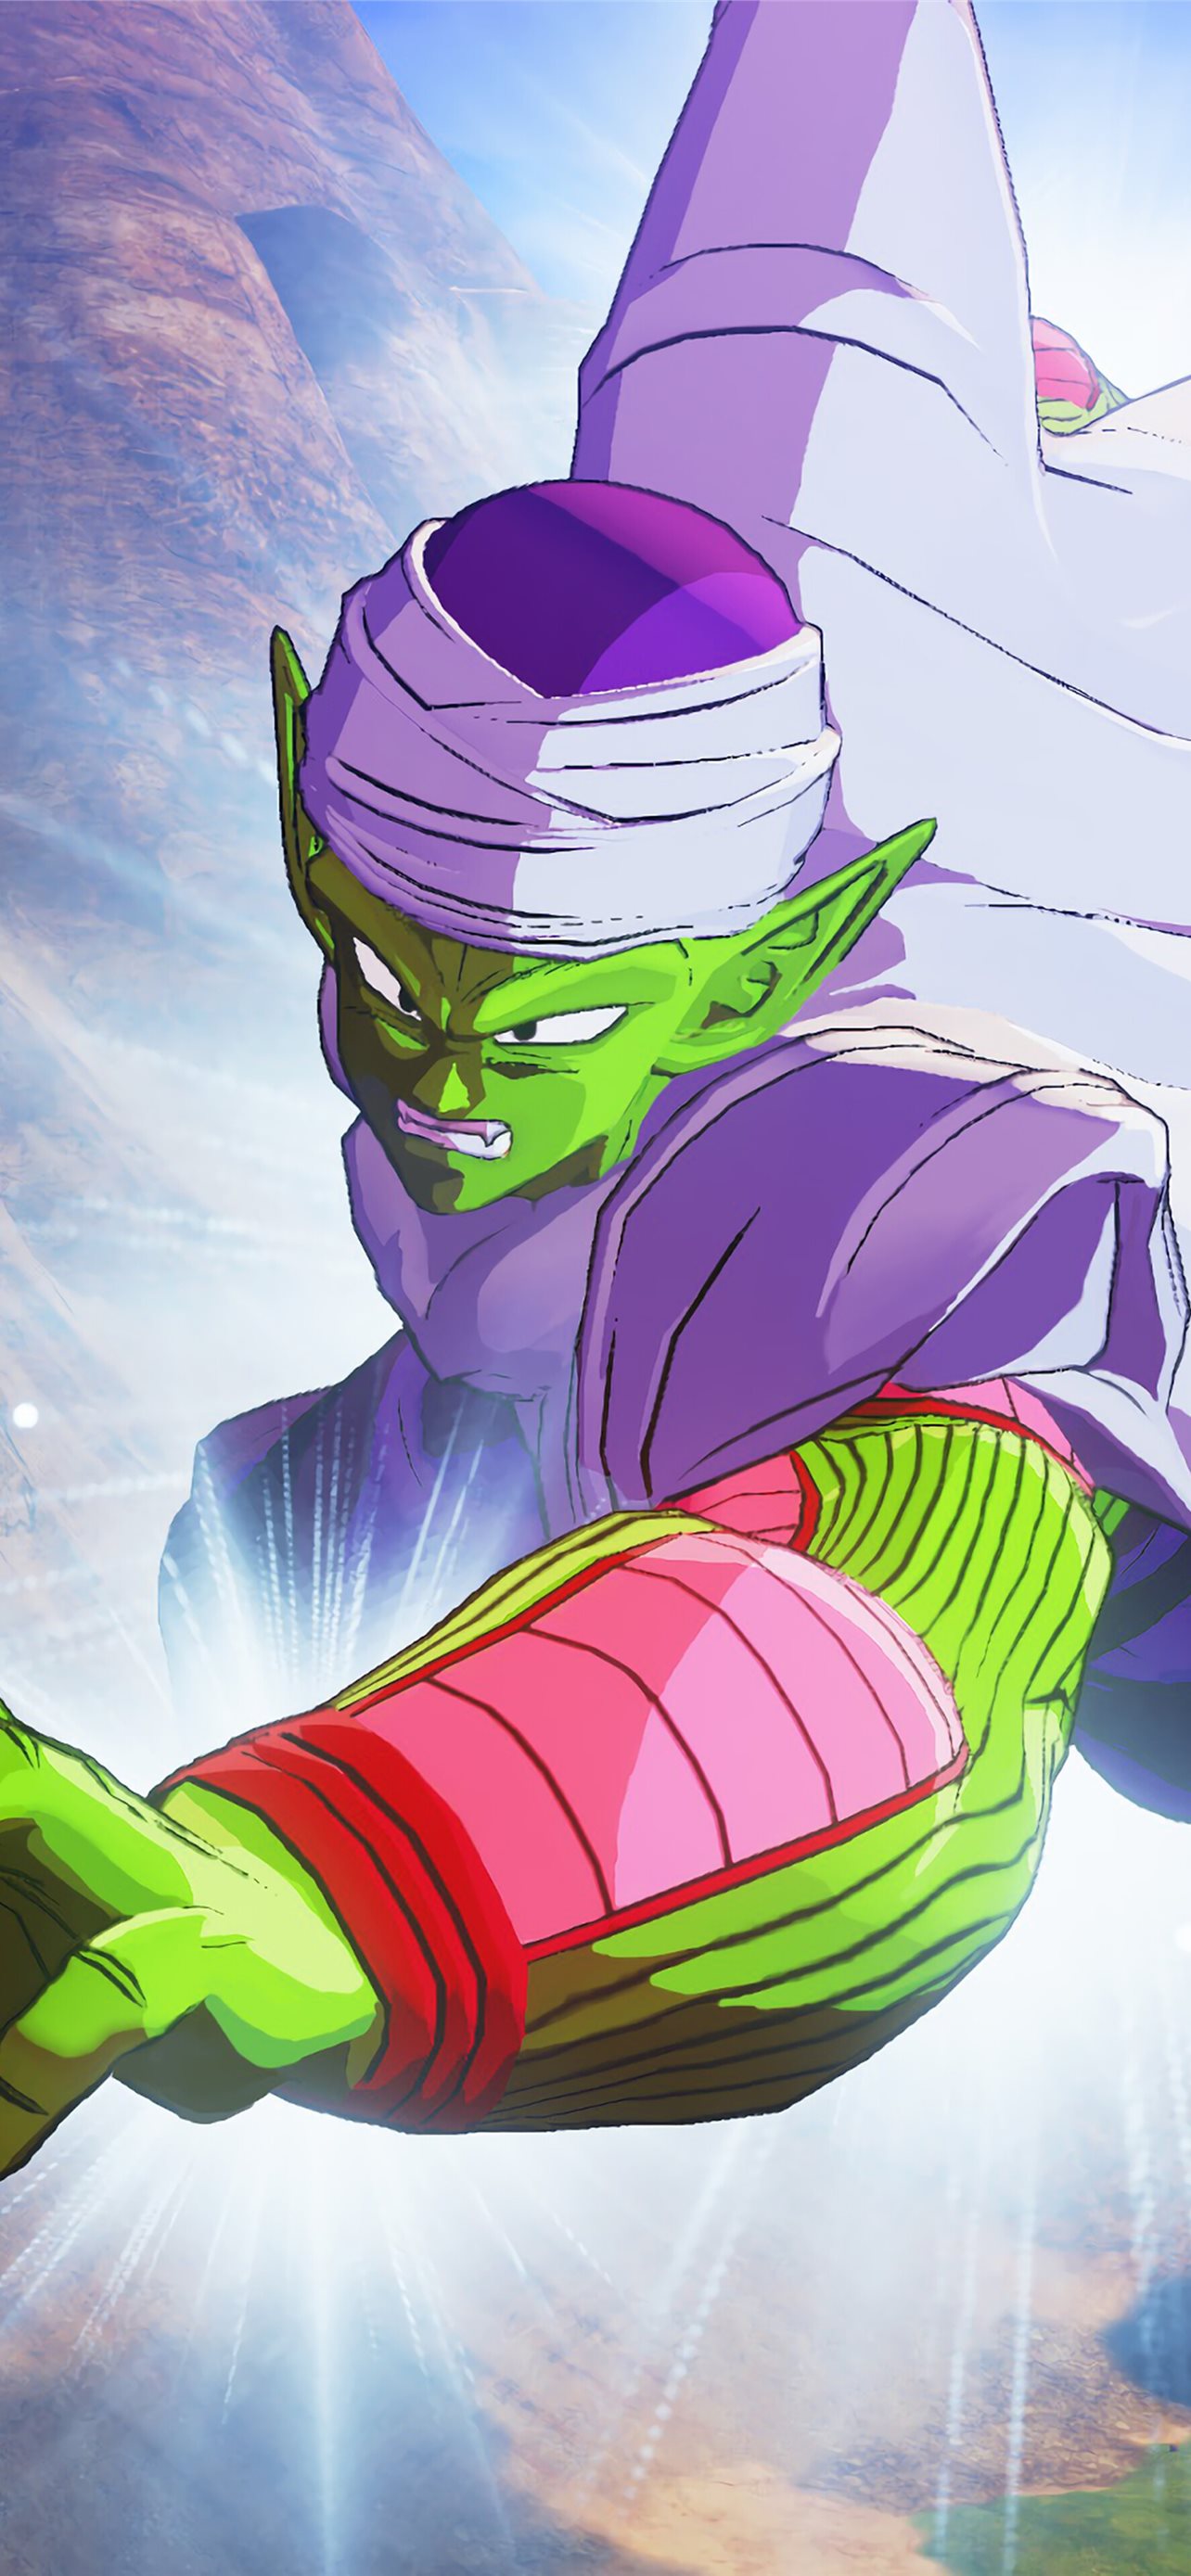 Piccolo Instrument Iphone Wallpapers Free Download